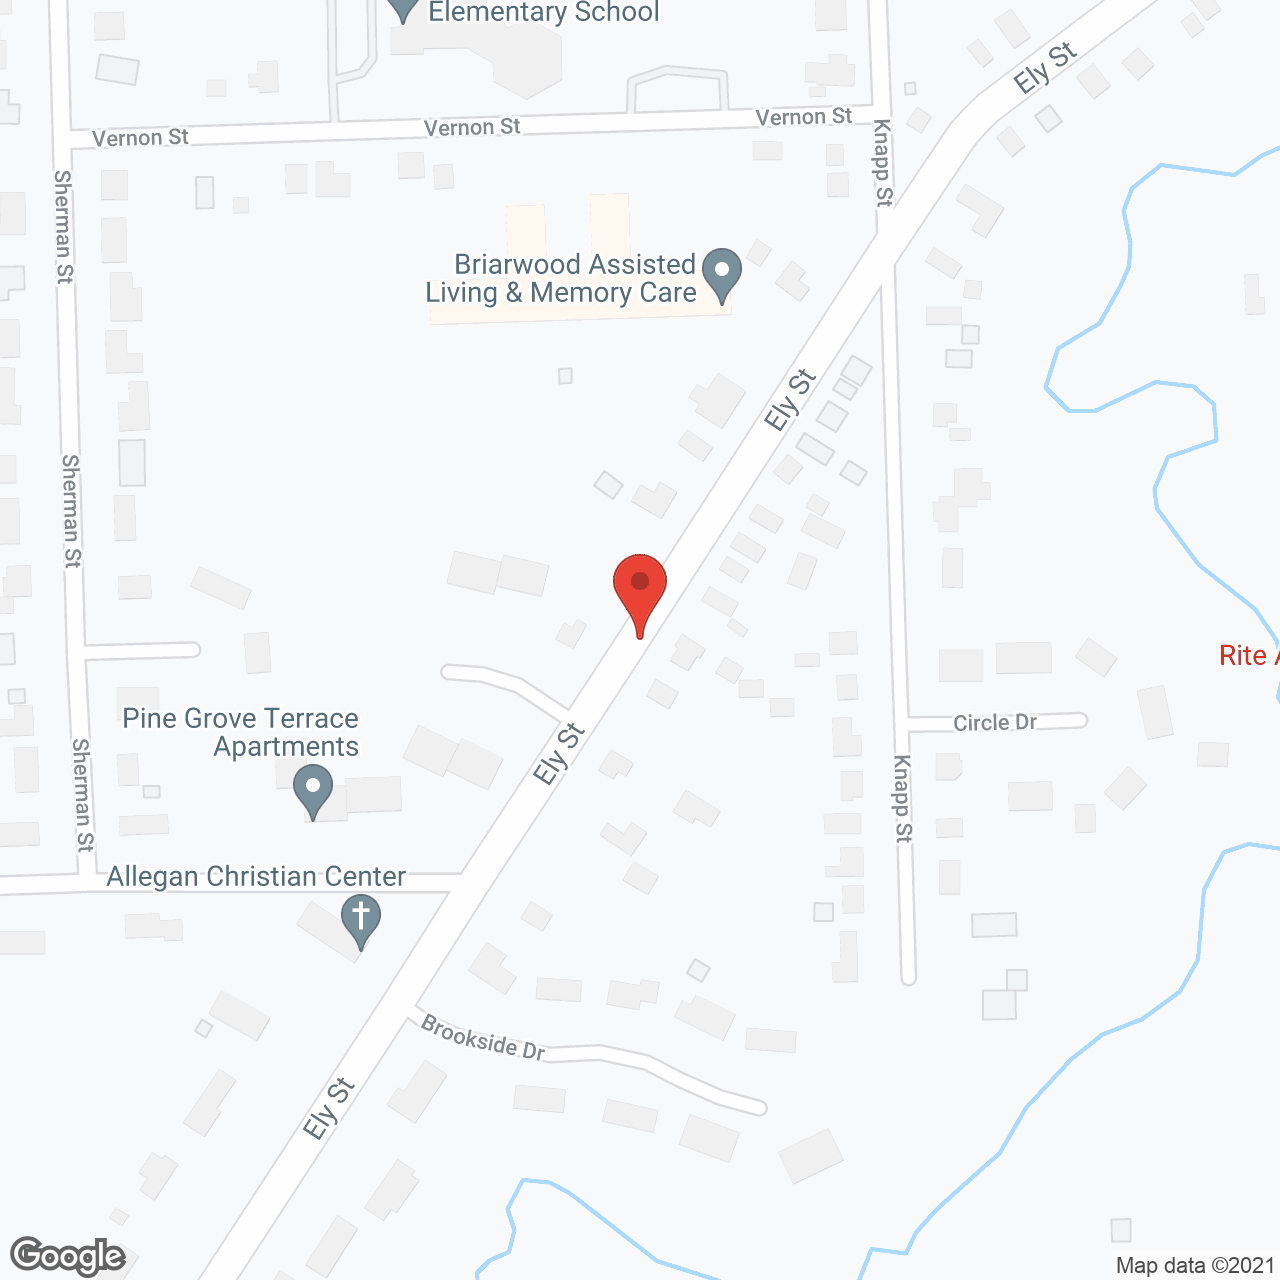 Briarwood Assisted Living & Memory Care in google map